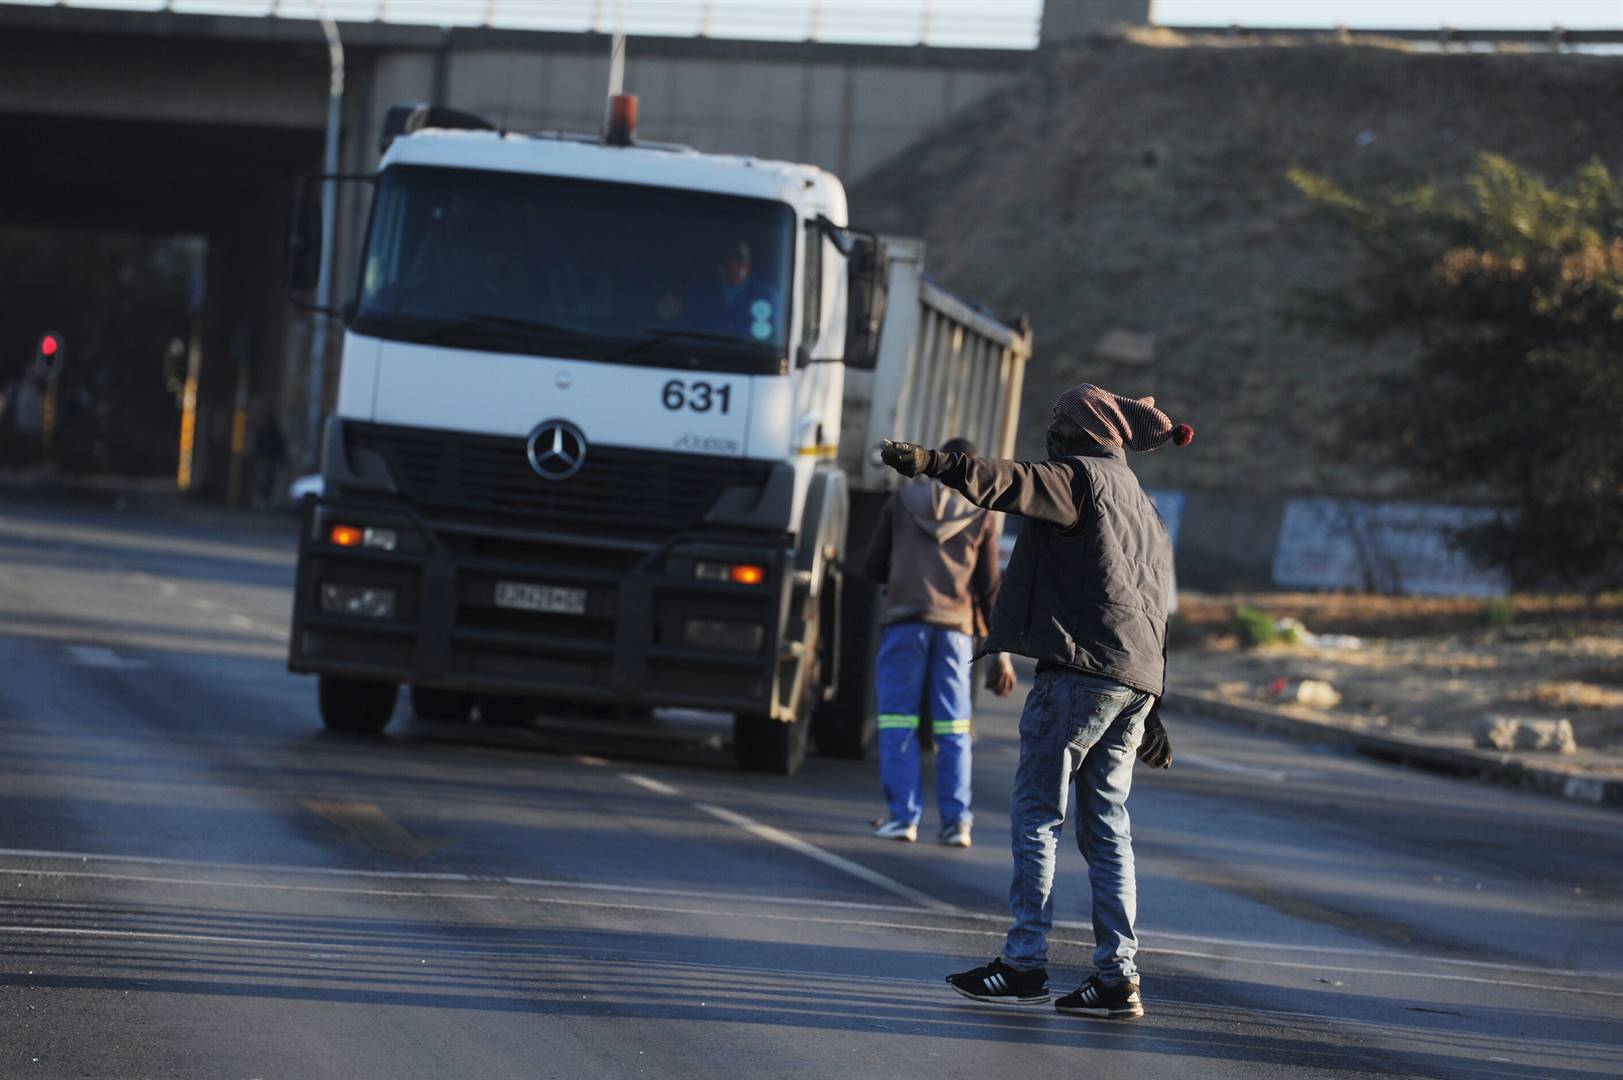 Truck drivers slam a truck in an attempt to force drivers to park at City Deep Truck stop in Doornfontein, Johannesburg. South African truck drivers are protesting against the employment of foreign nationals. Picture: Rosetta Msimango/City Press